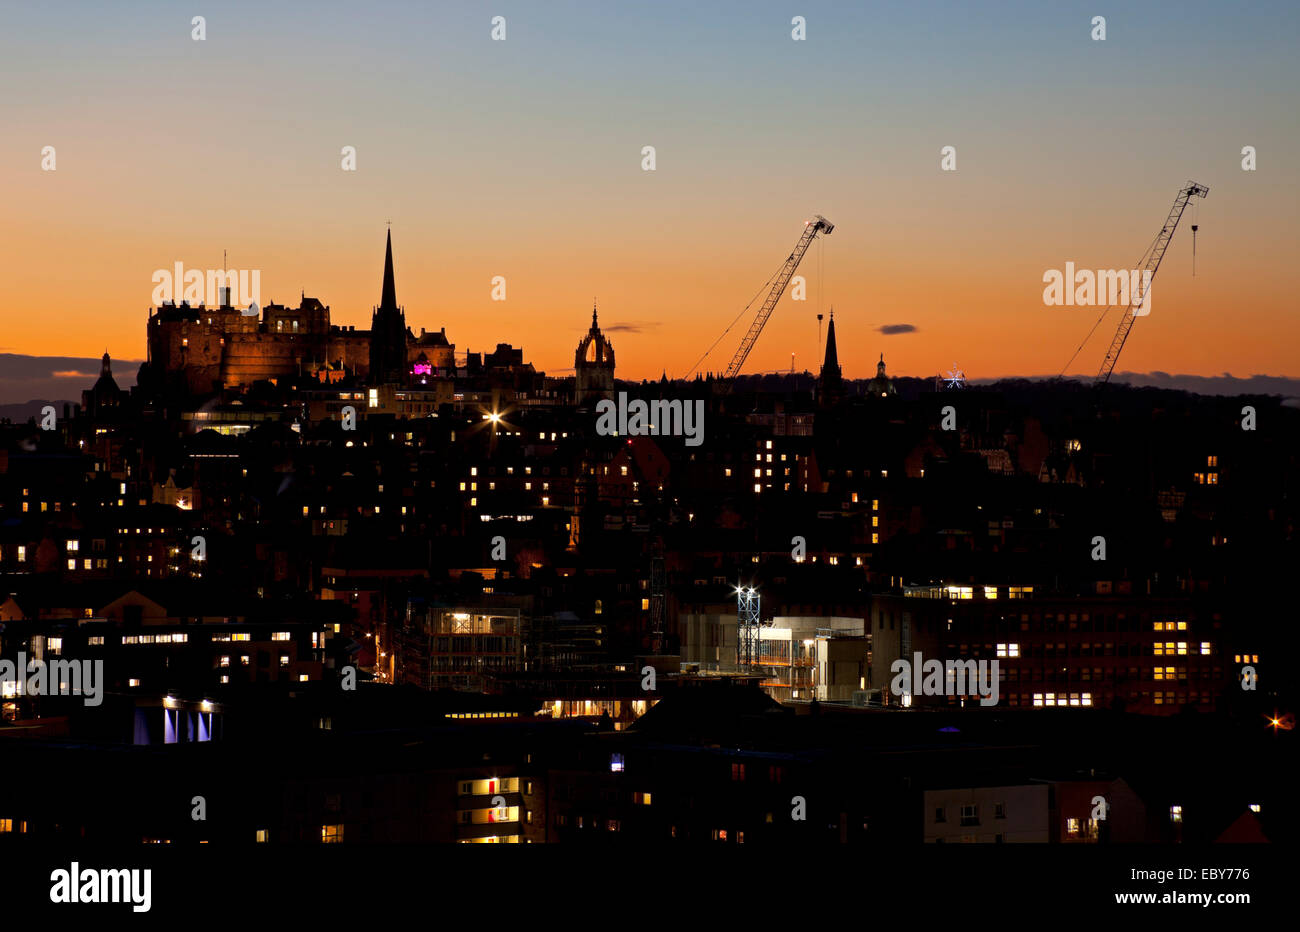 Edinburgh, Scotland, UK. 5th December, 2014. Edinburgh city centre had beautiful clear skies approaching dusk, as the temperature is forecast to drop to zero degrees or lower overnight in the city. Even construction cranes can look good when backlit with the afterglow of a setting sun. Stock Photo